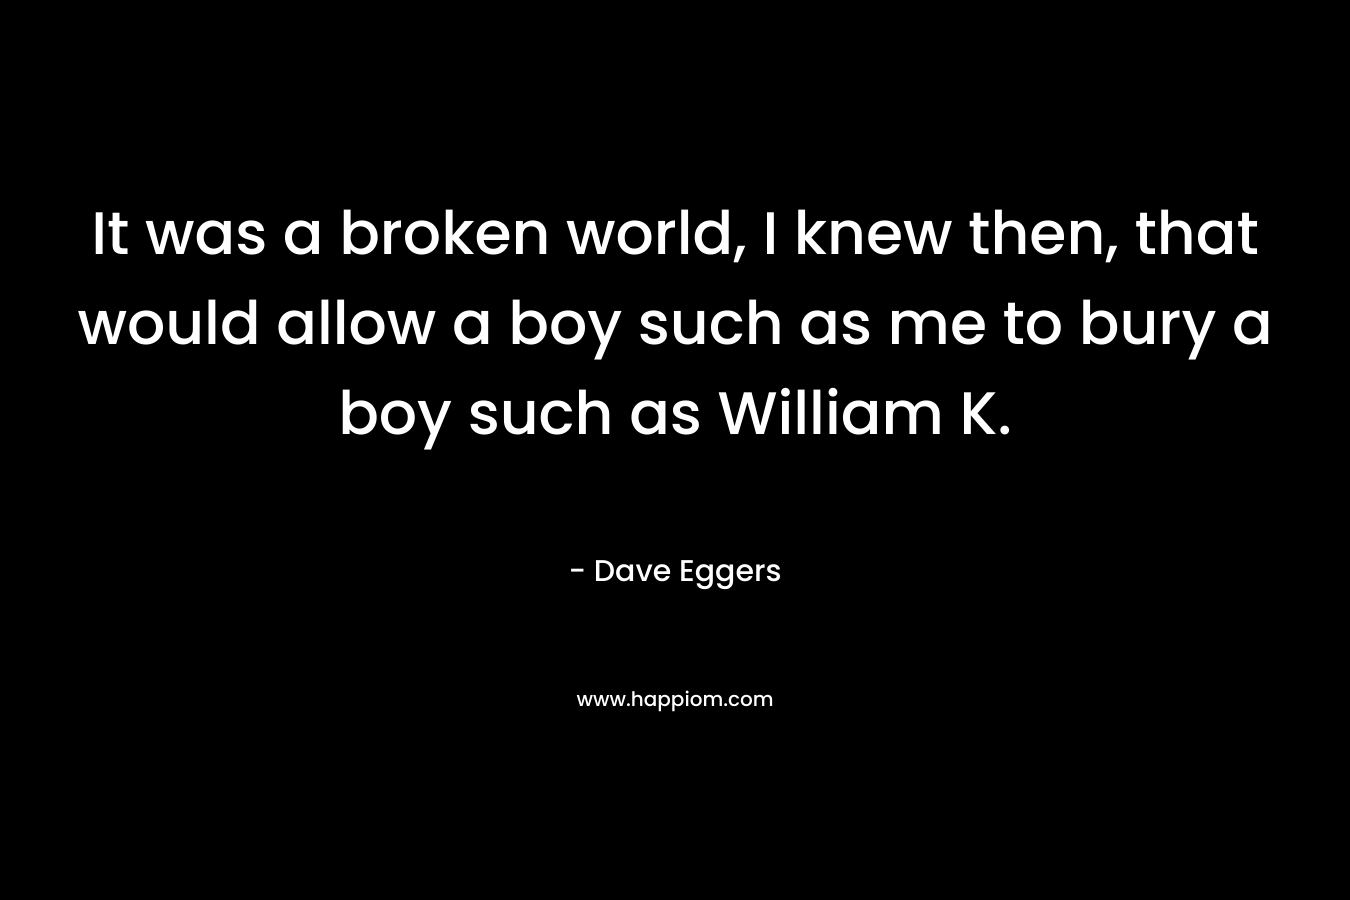 It was a broken world, I knew then, that would allow a boy such as me to bury a boy such as William K. – Dave Eggers